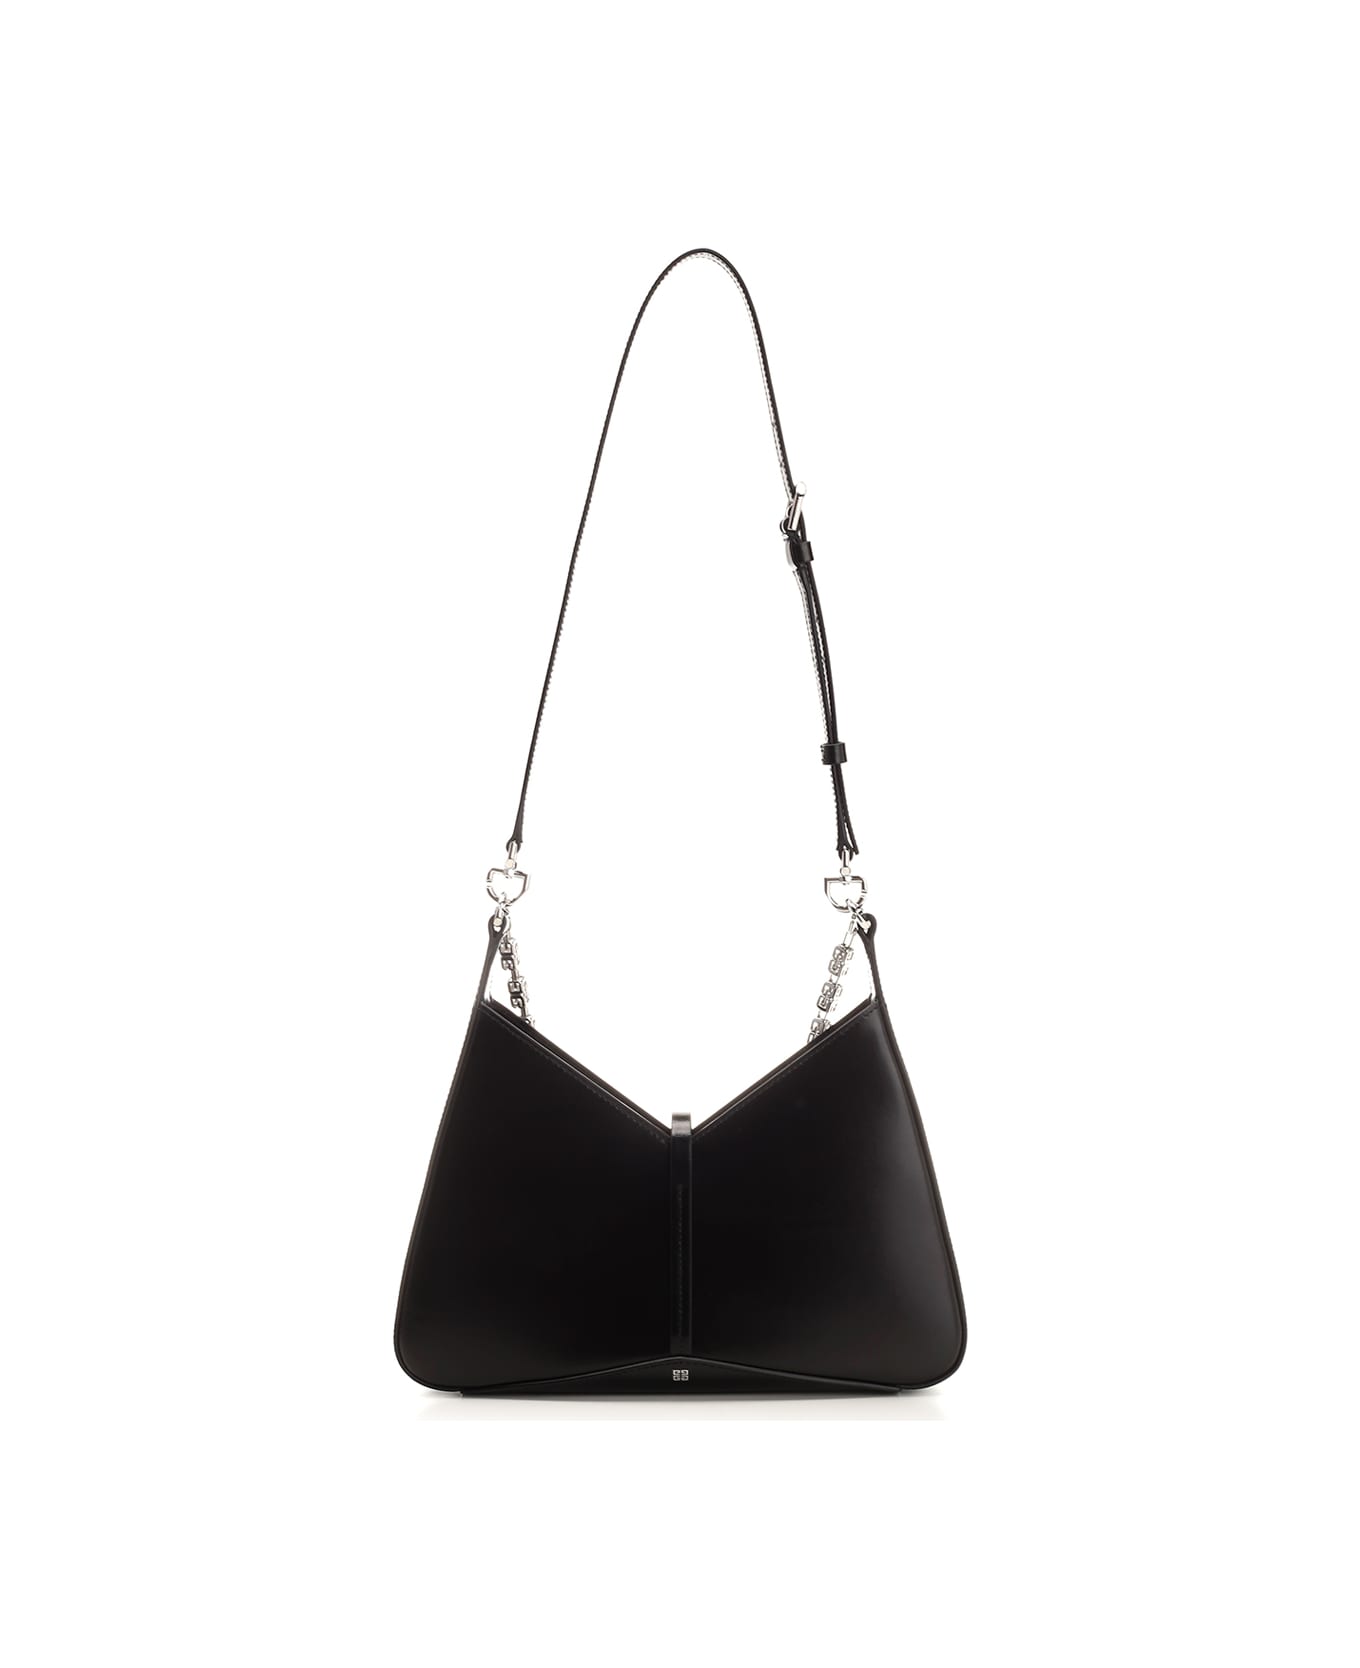 Givenchy 'cut Out' Small Cross-body Bag - Black